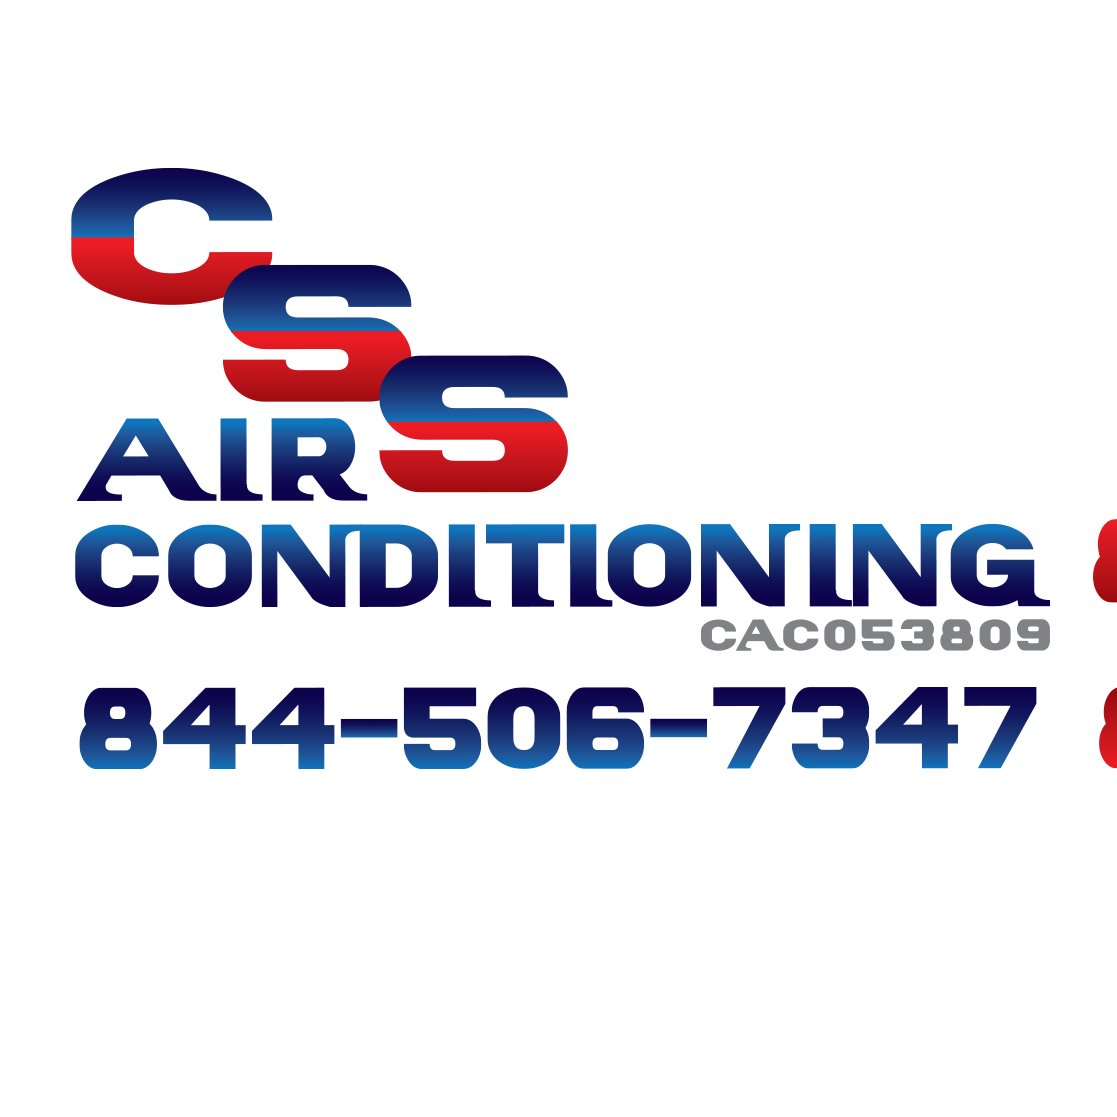 From routine AC Repairs and Air Conditioner Maintenance to expert HVAC equipment installation and replacement. Skilled technicians
24hr/7